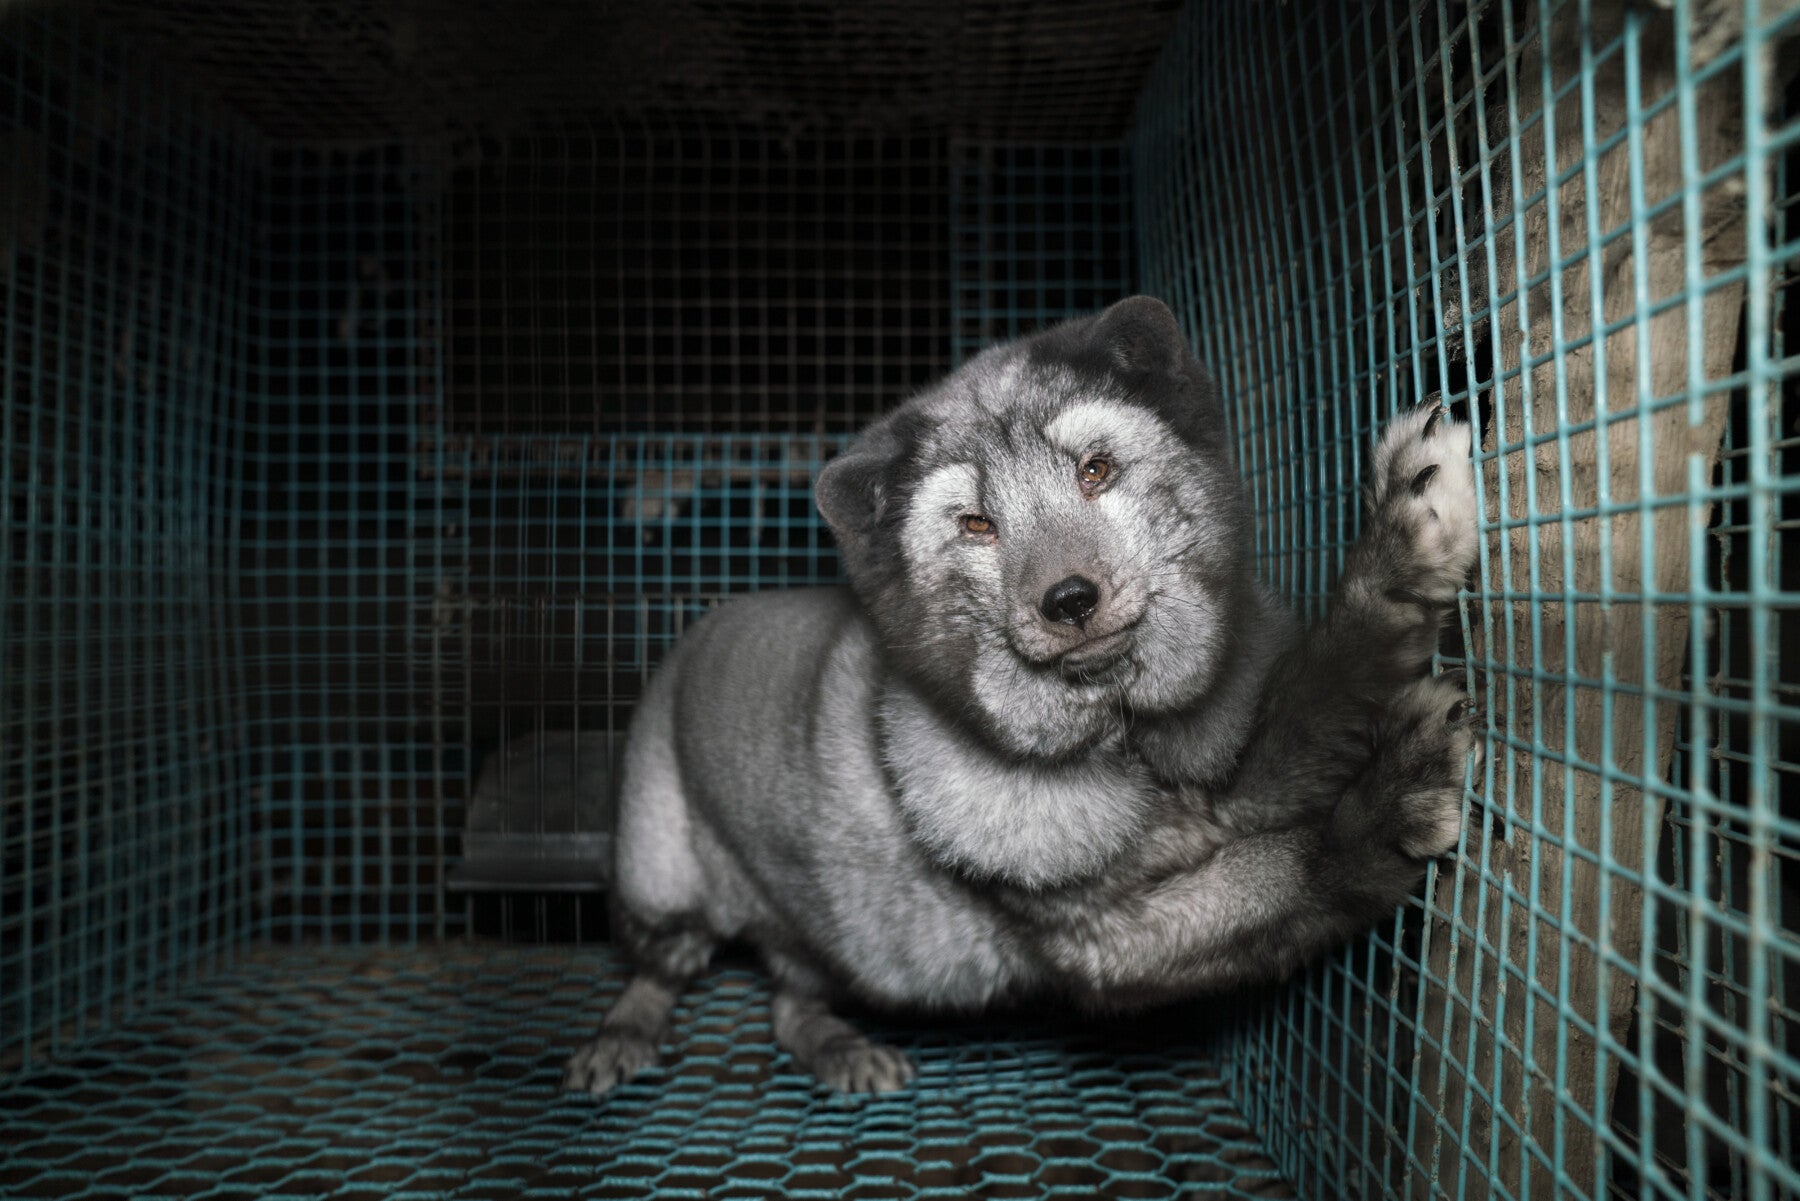 Harrods' staff tell secret shopper that animals in fur farms 'don't suffer'  and have 'their own private space' 'like Battersea' - Humane Society  International